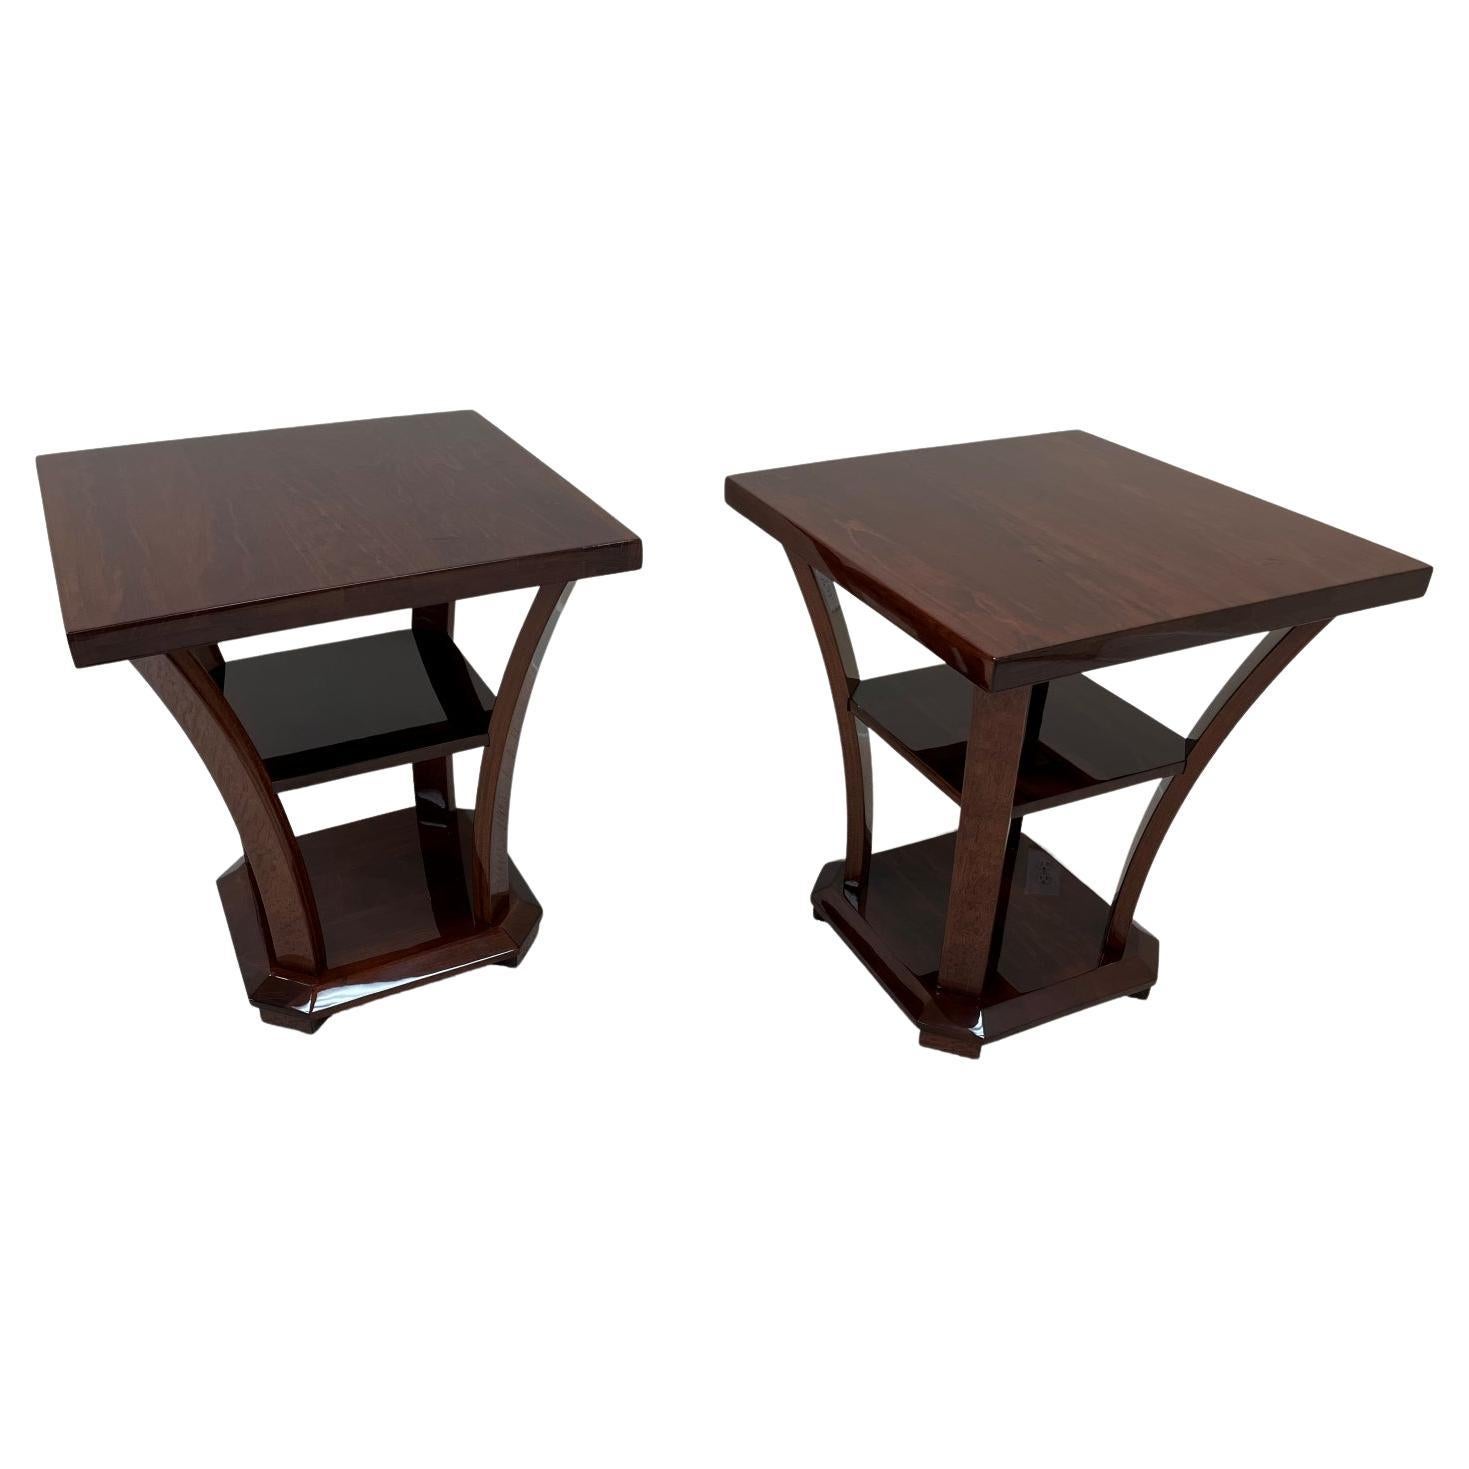 Elegant Art Deco side tables reminiscent of the works by Gilbert Rohde or Donald Deskey. A great pair of Machine Age Art Deco Tables. The tables feature three tiers connected by four curving streamline supports. A very versatile piece; perfect as an